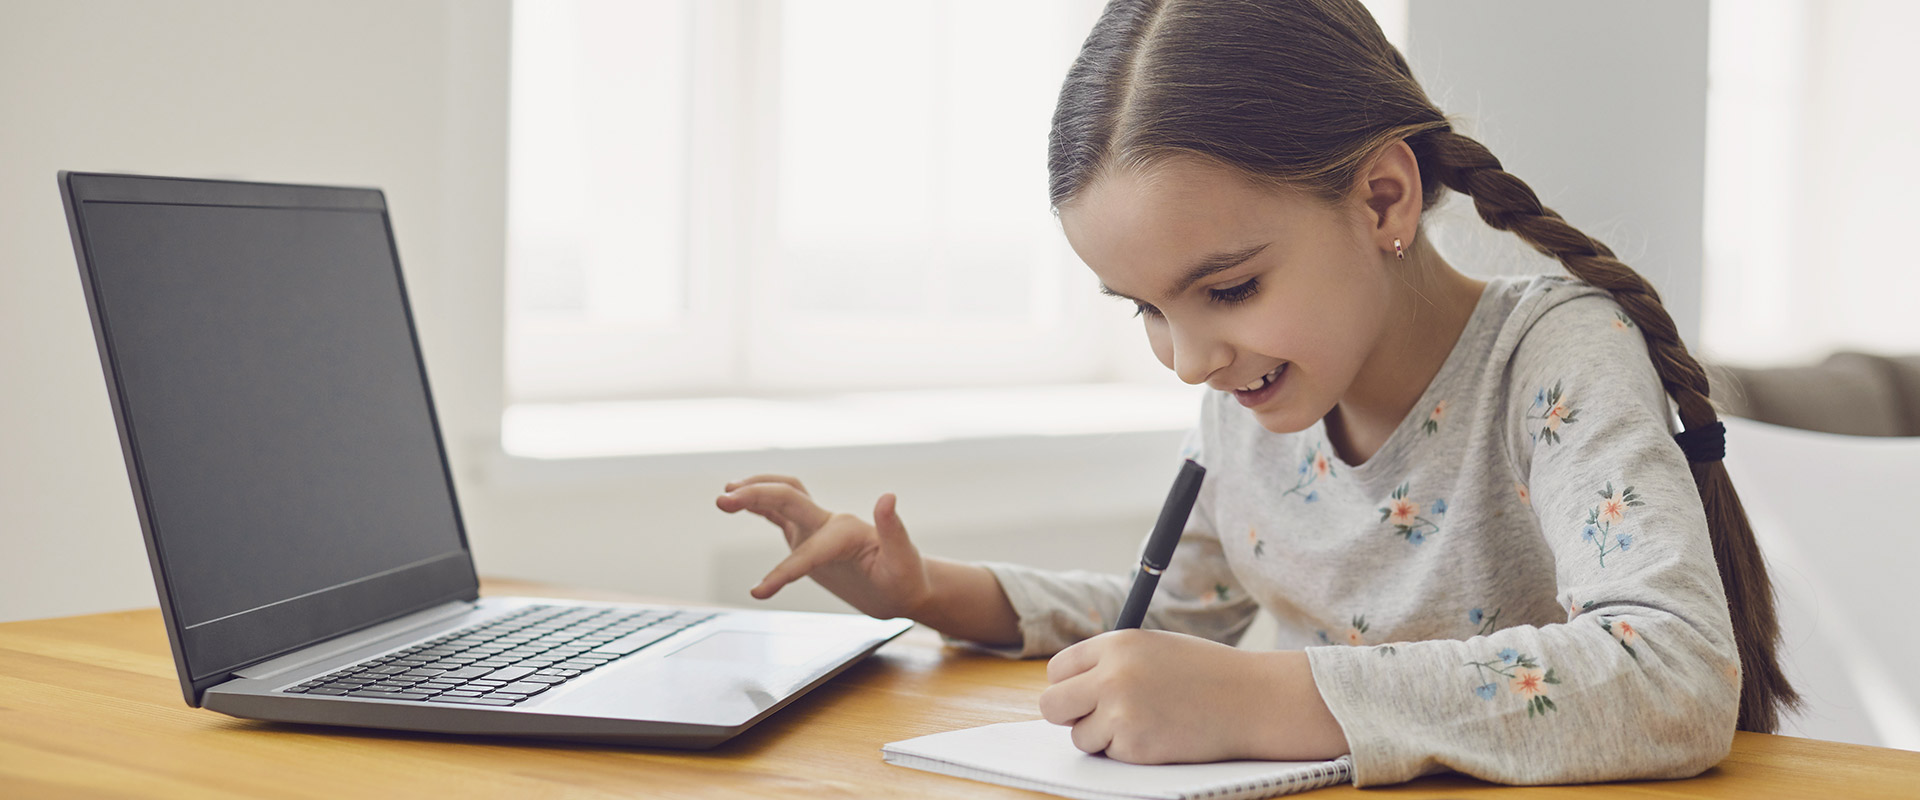 Little girl with pigtails writing and using a laptop